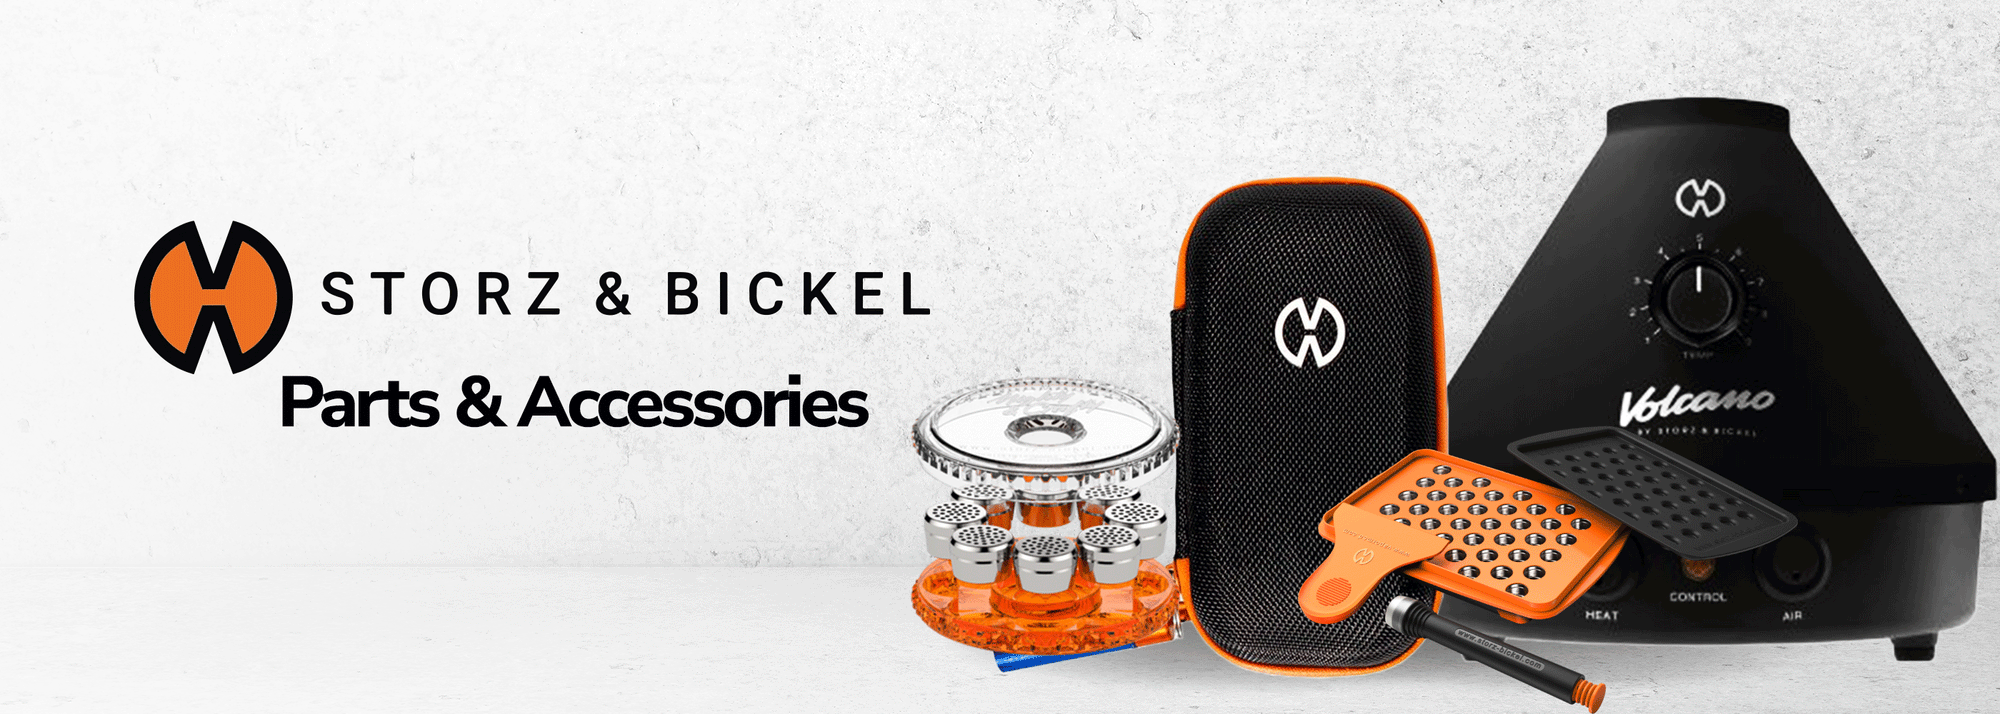 Buy Storz and Bickel Part & Accessories | Wick and Wire Co, Melbourne Australia 